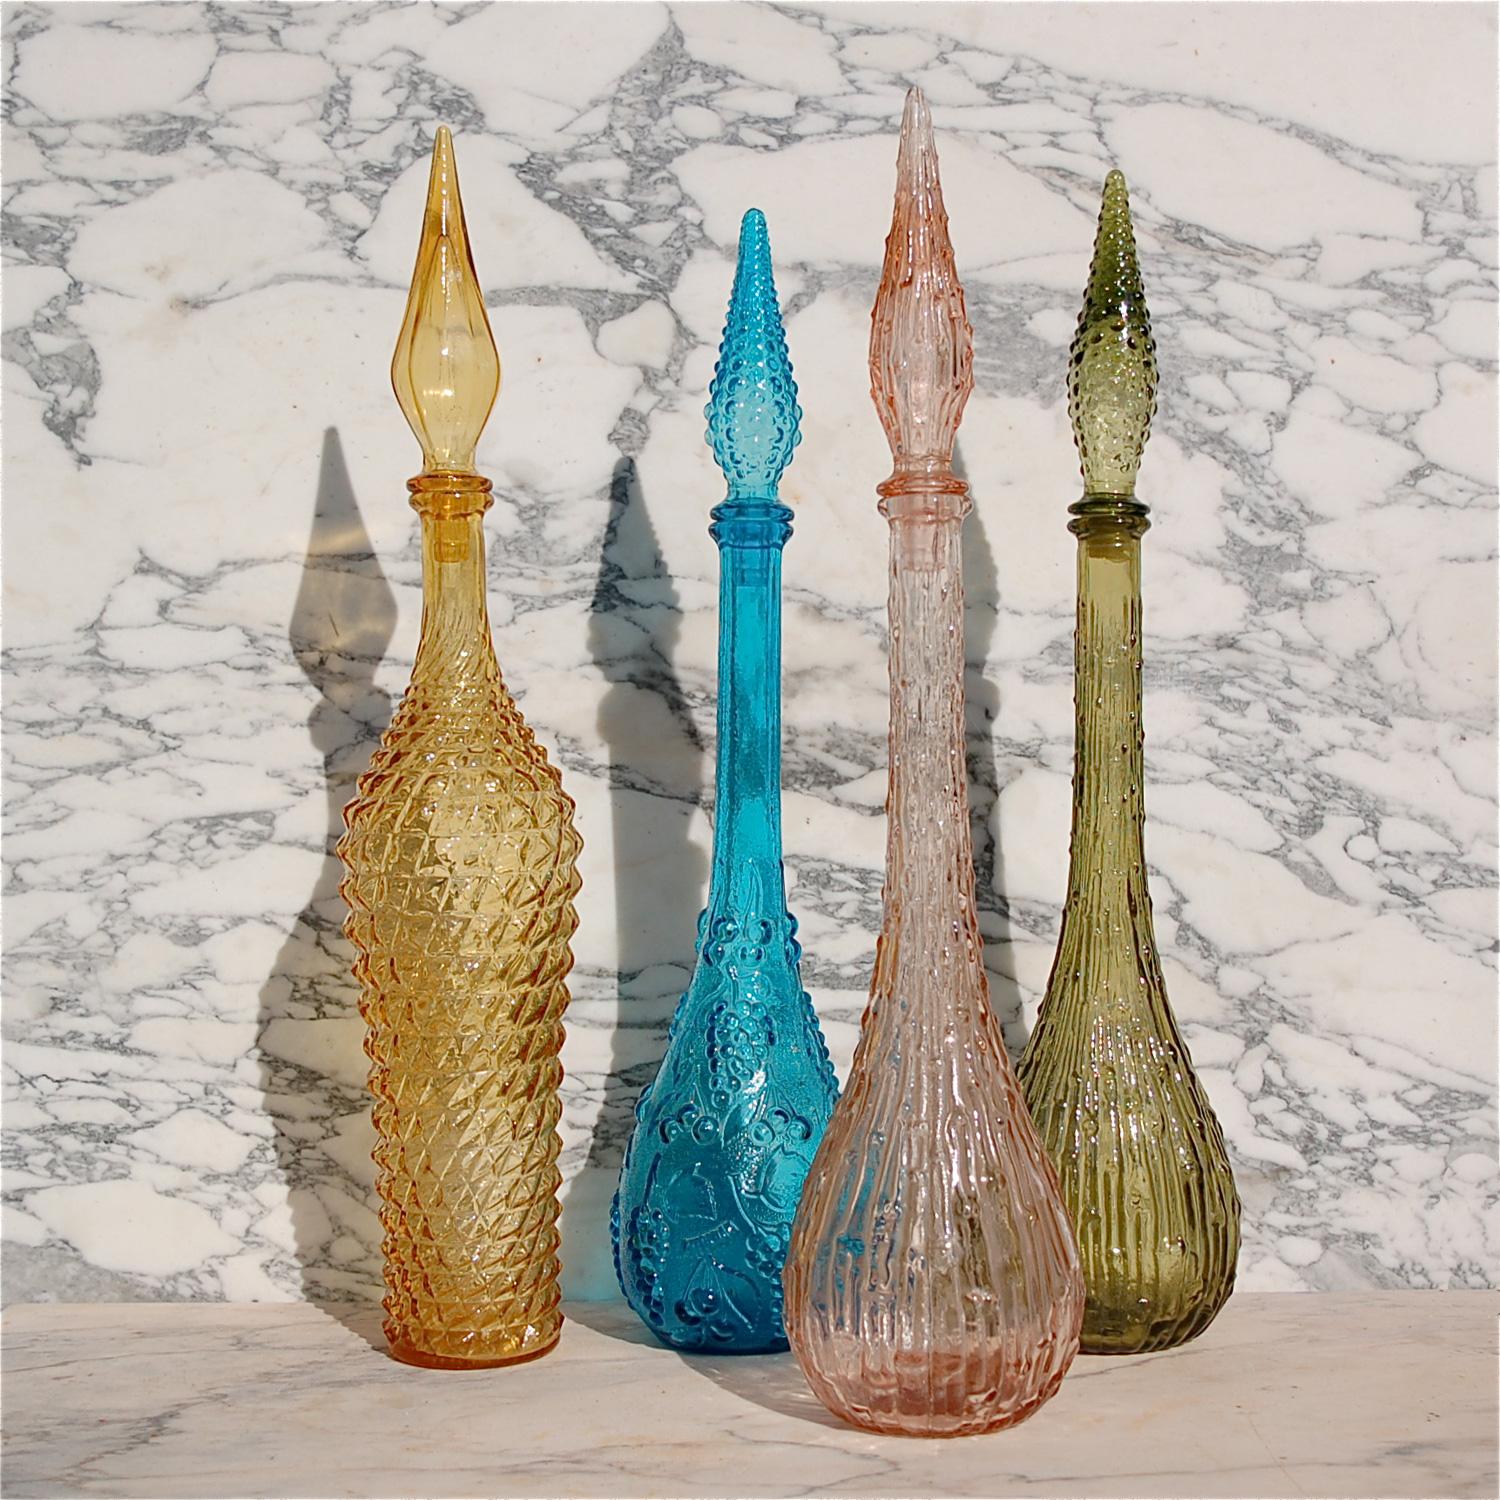 A collection of four Italian decanter bottles with stoppers, dating back to mid-20th century. This set includes different designs of which the pink and green are most similar. The common thread is the textured outer surface, which makes them very